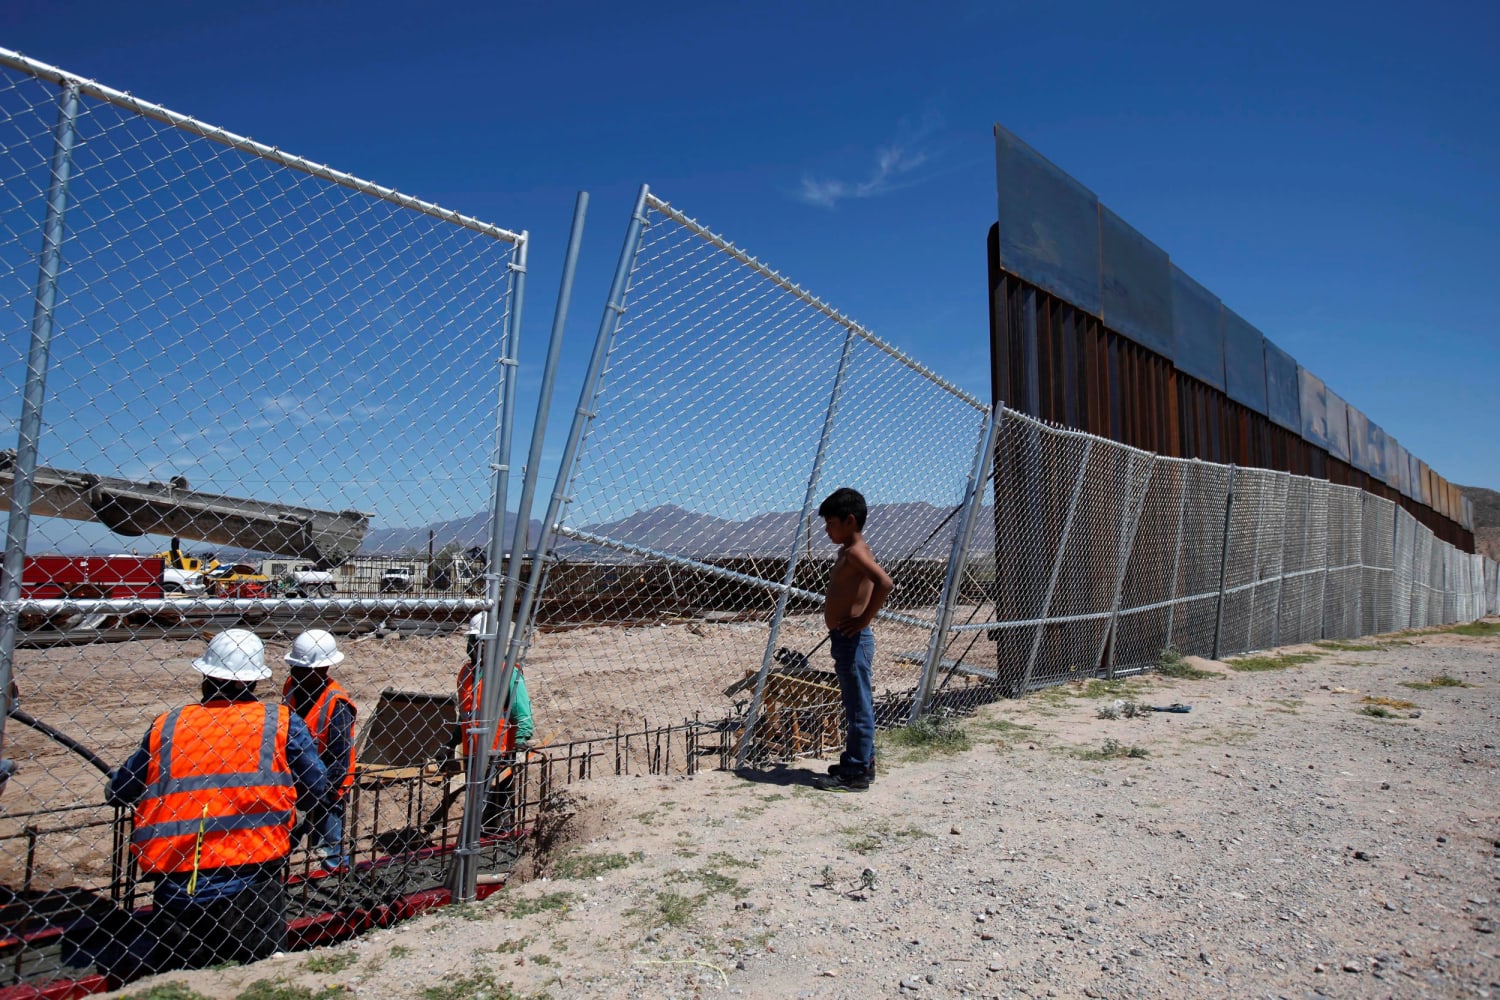 Trump Border 'Wall' Could Cost $21.6 Billion, Take 3.5 Years to Build: Report